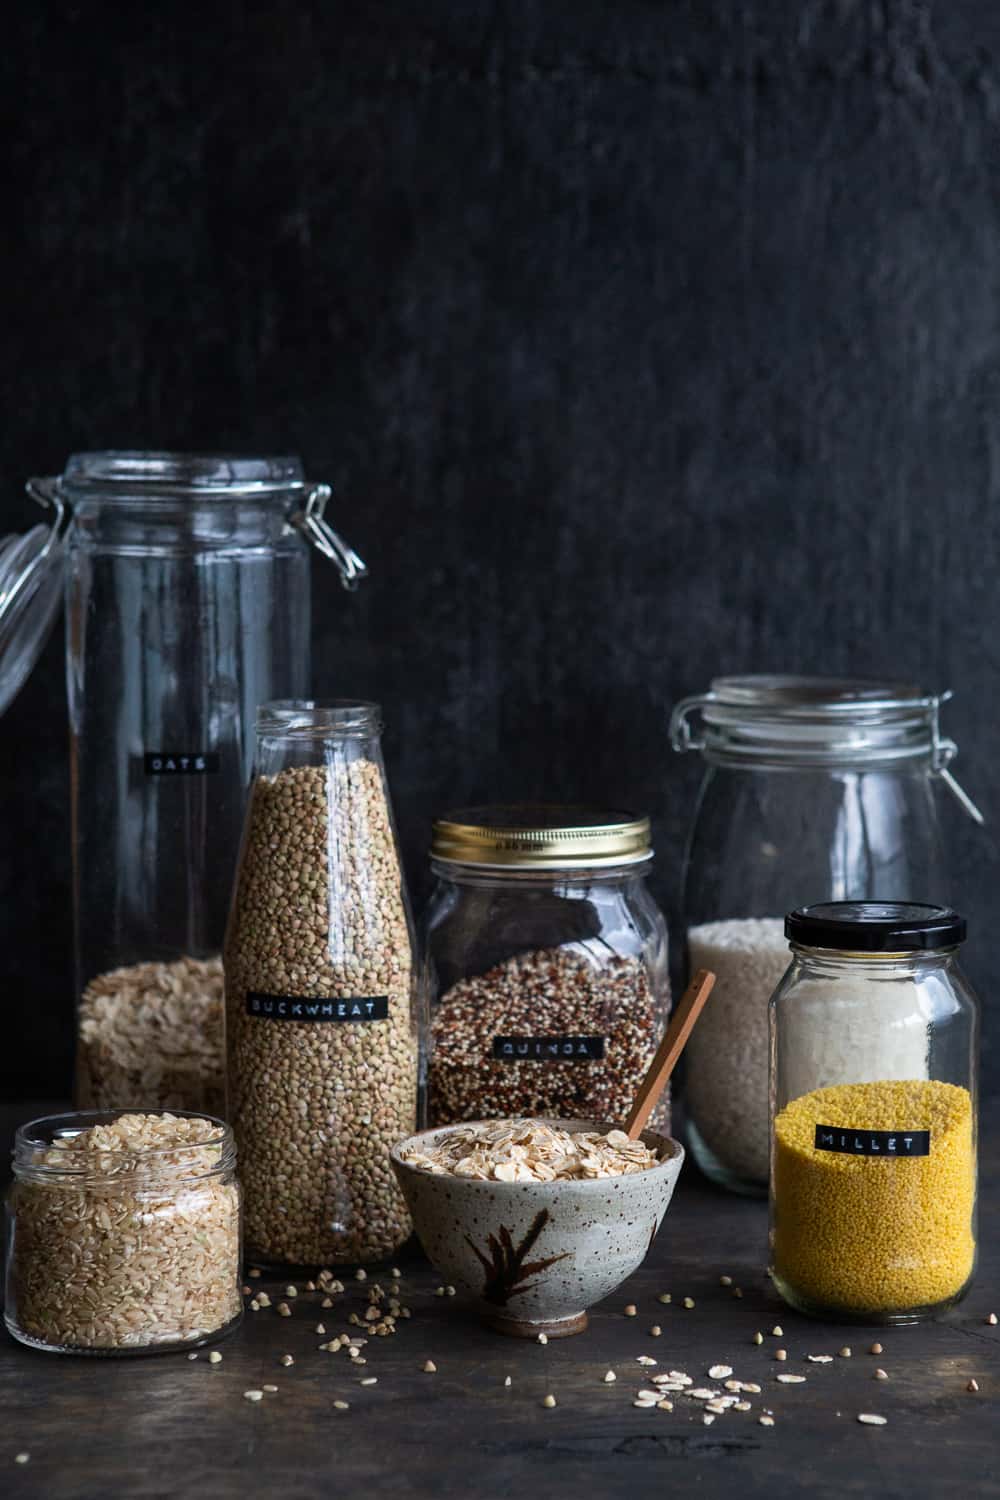 An assortment of jars with grains.